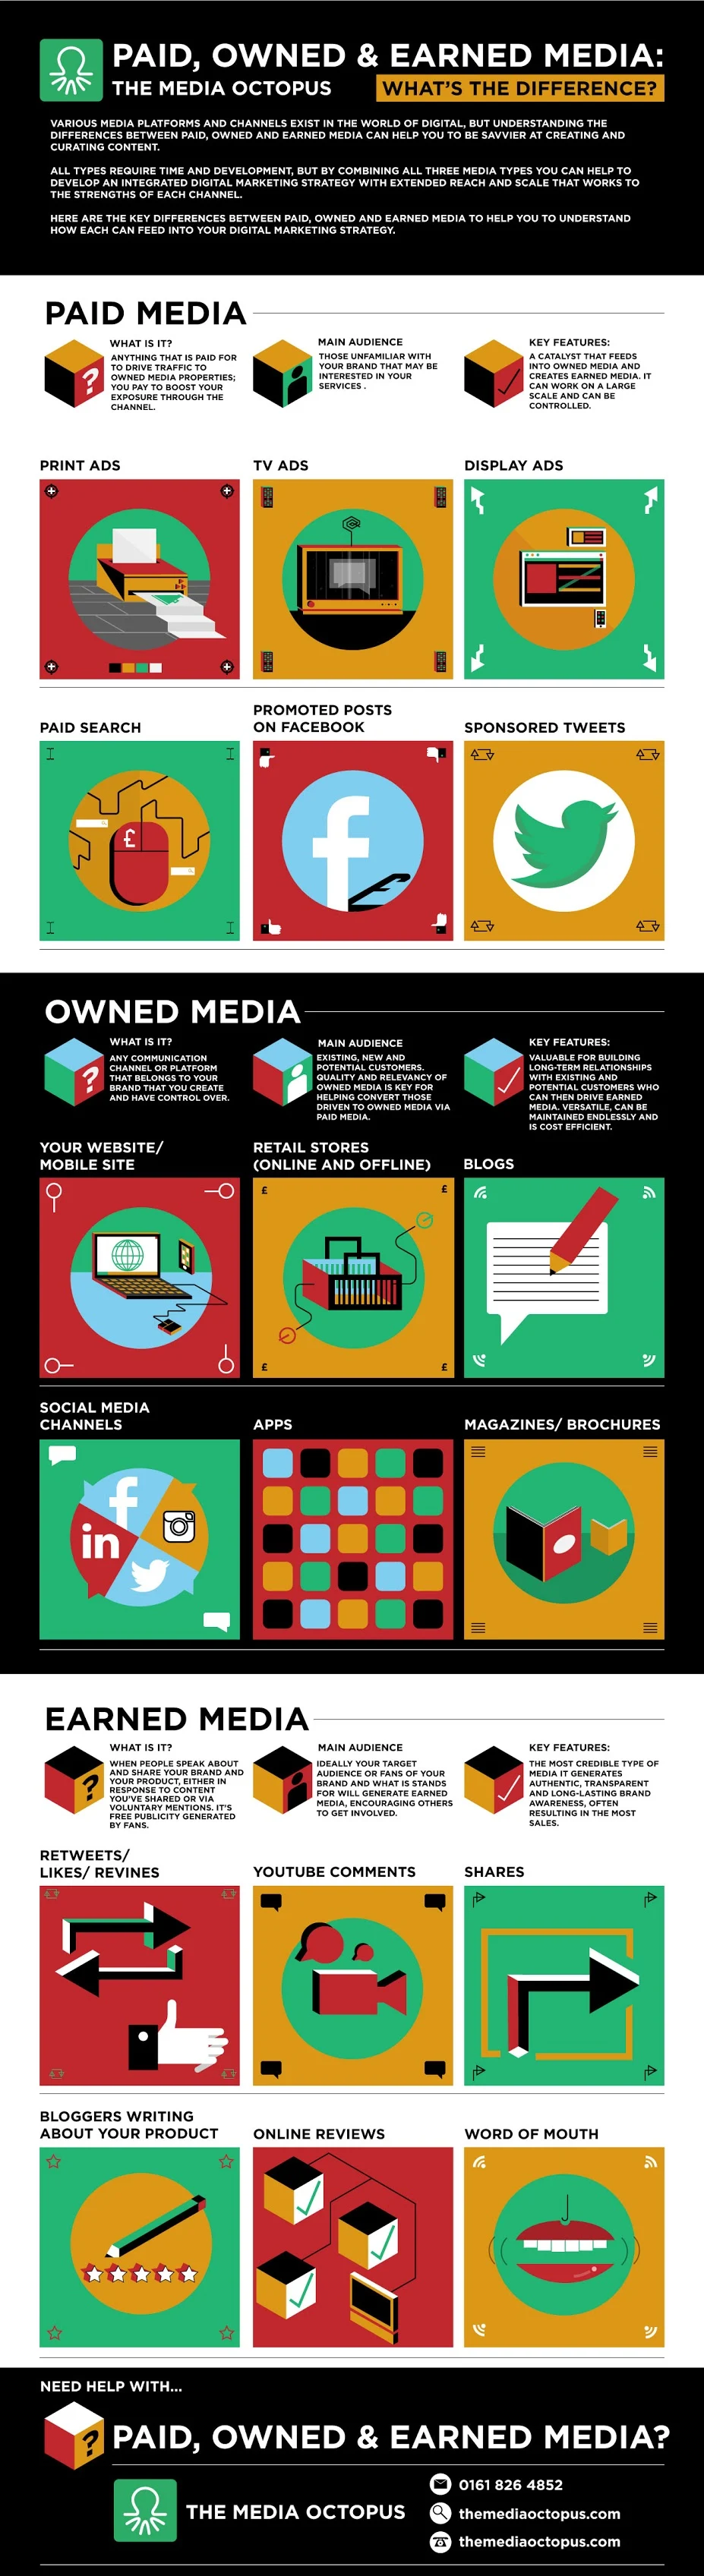 #DigitalMarketing - The Difference Between Paid, Owned And Earned Media - #infographic #internetmarketing #socialmedia #content